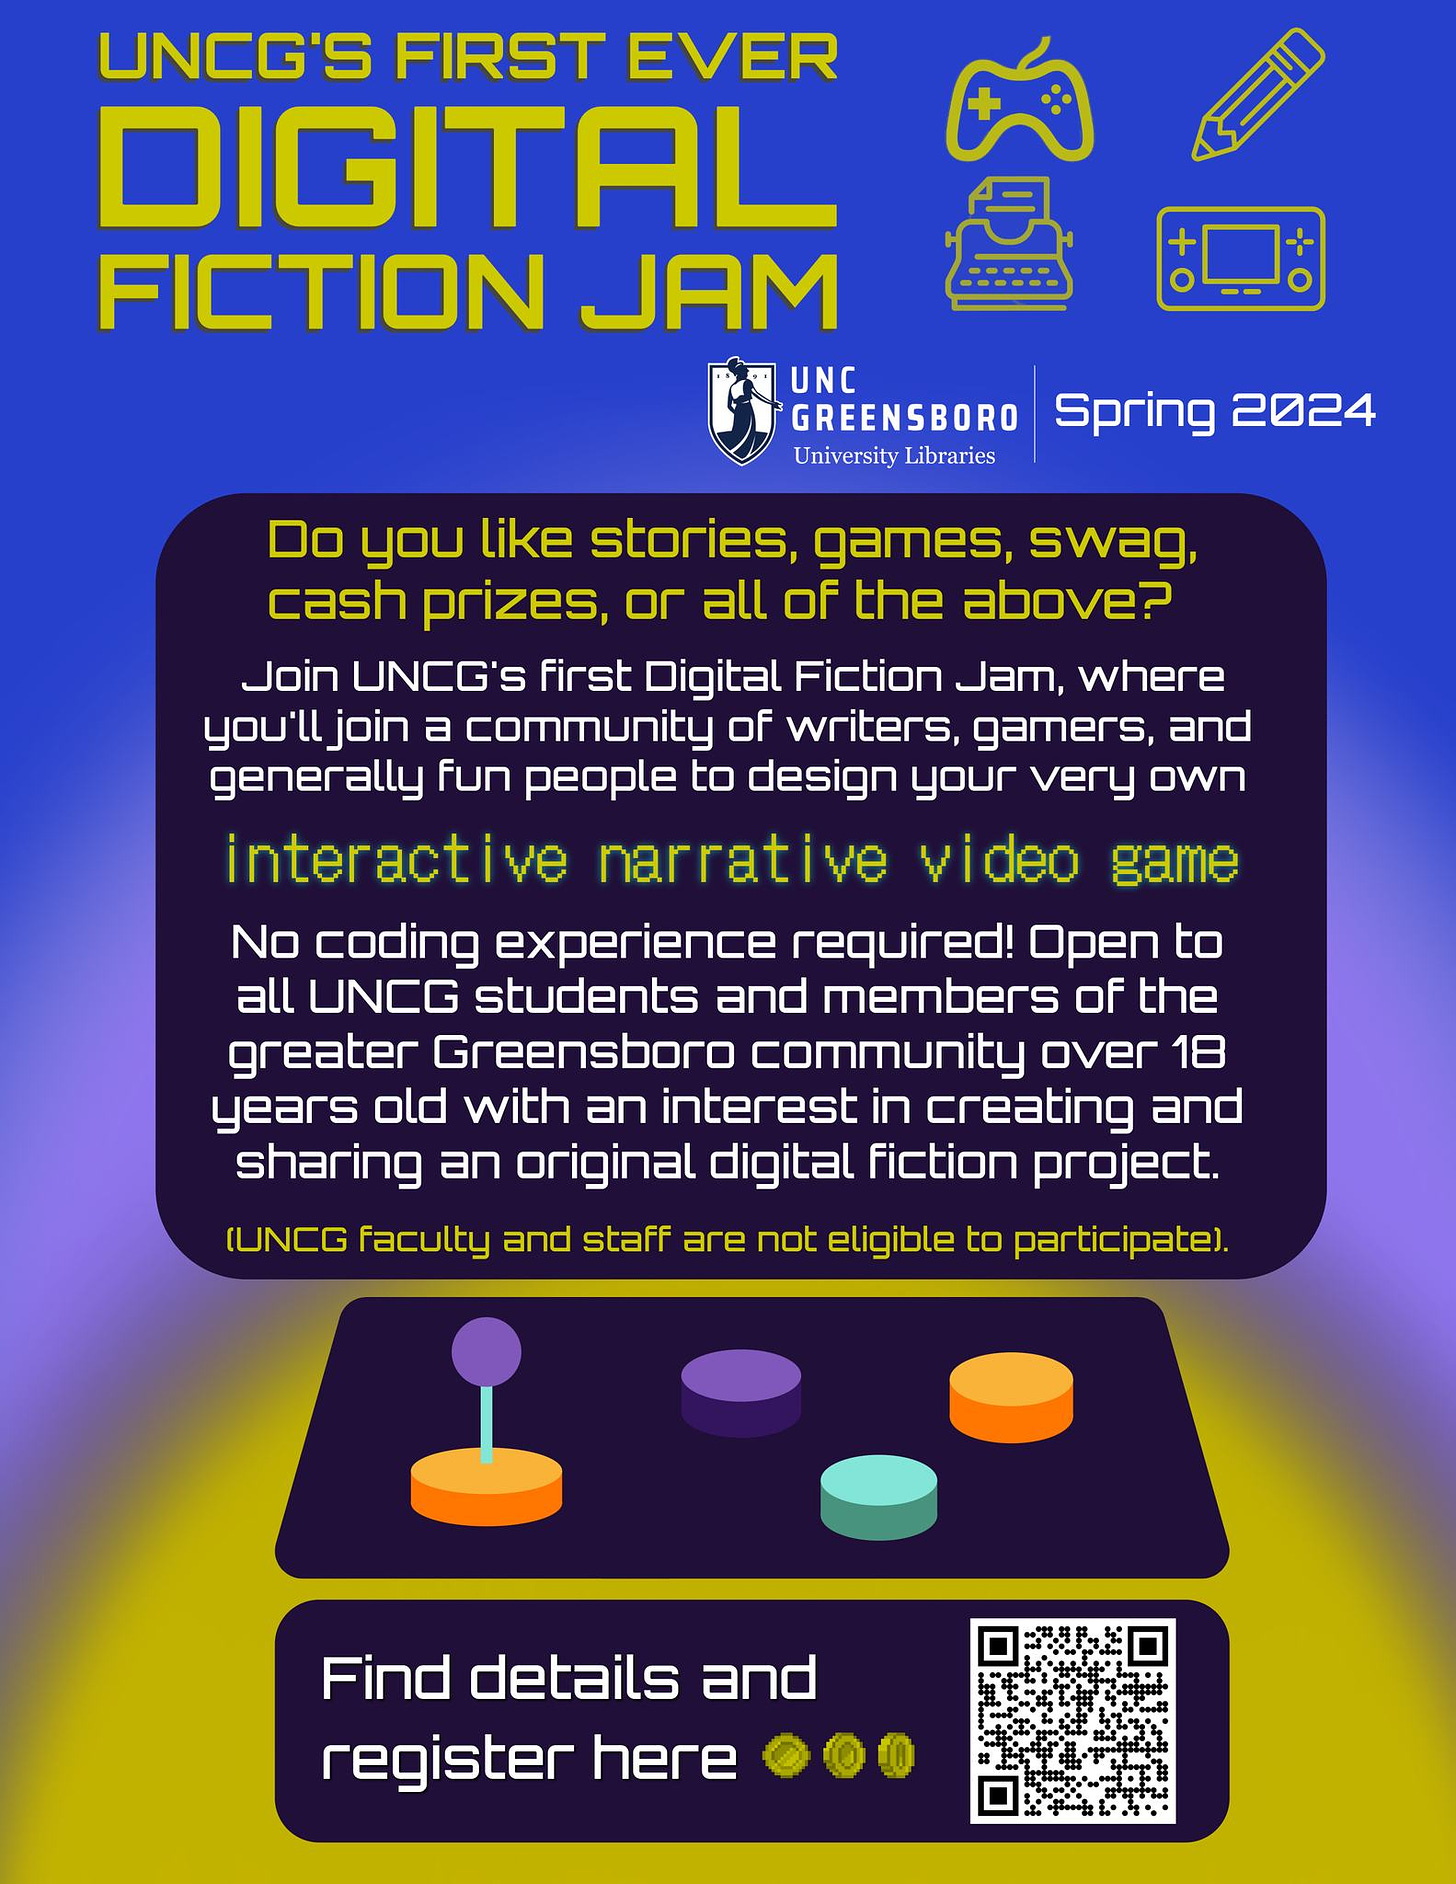 May be a doodle of text that says 'UNCG'S FIRST EVER DIGITAL FICTION JAM UNC GREENSBORO Spring 2024 University Libraries Do you like stories, games, swag, cash prizes, or all of the above? Join UNCG's first Digital Fiction Jam, where you'lljoin a community of writers, gamers, and generally fun people to design your very own interactive narrative ideo game No coding experience required! Open to all UNCG students and members of the greater Greensboro community over 18 years old with an interest in creating and sharing an original digital fiction project. (UNCG faculty and staff are not eligible to participate) Find details and register here'